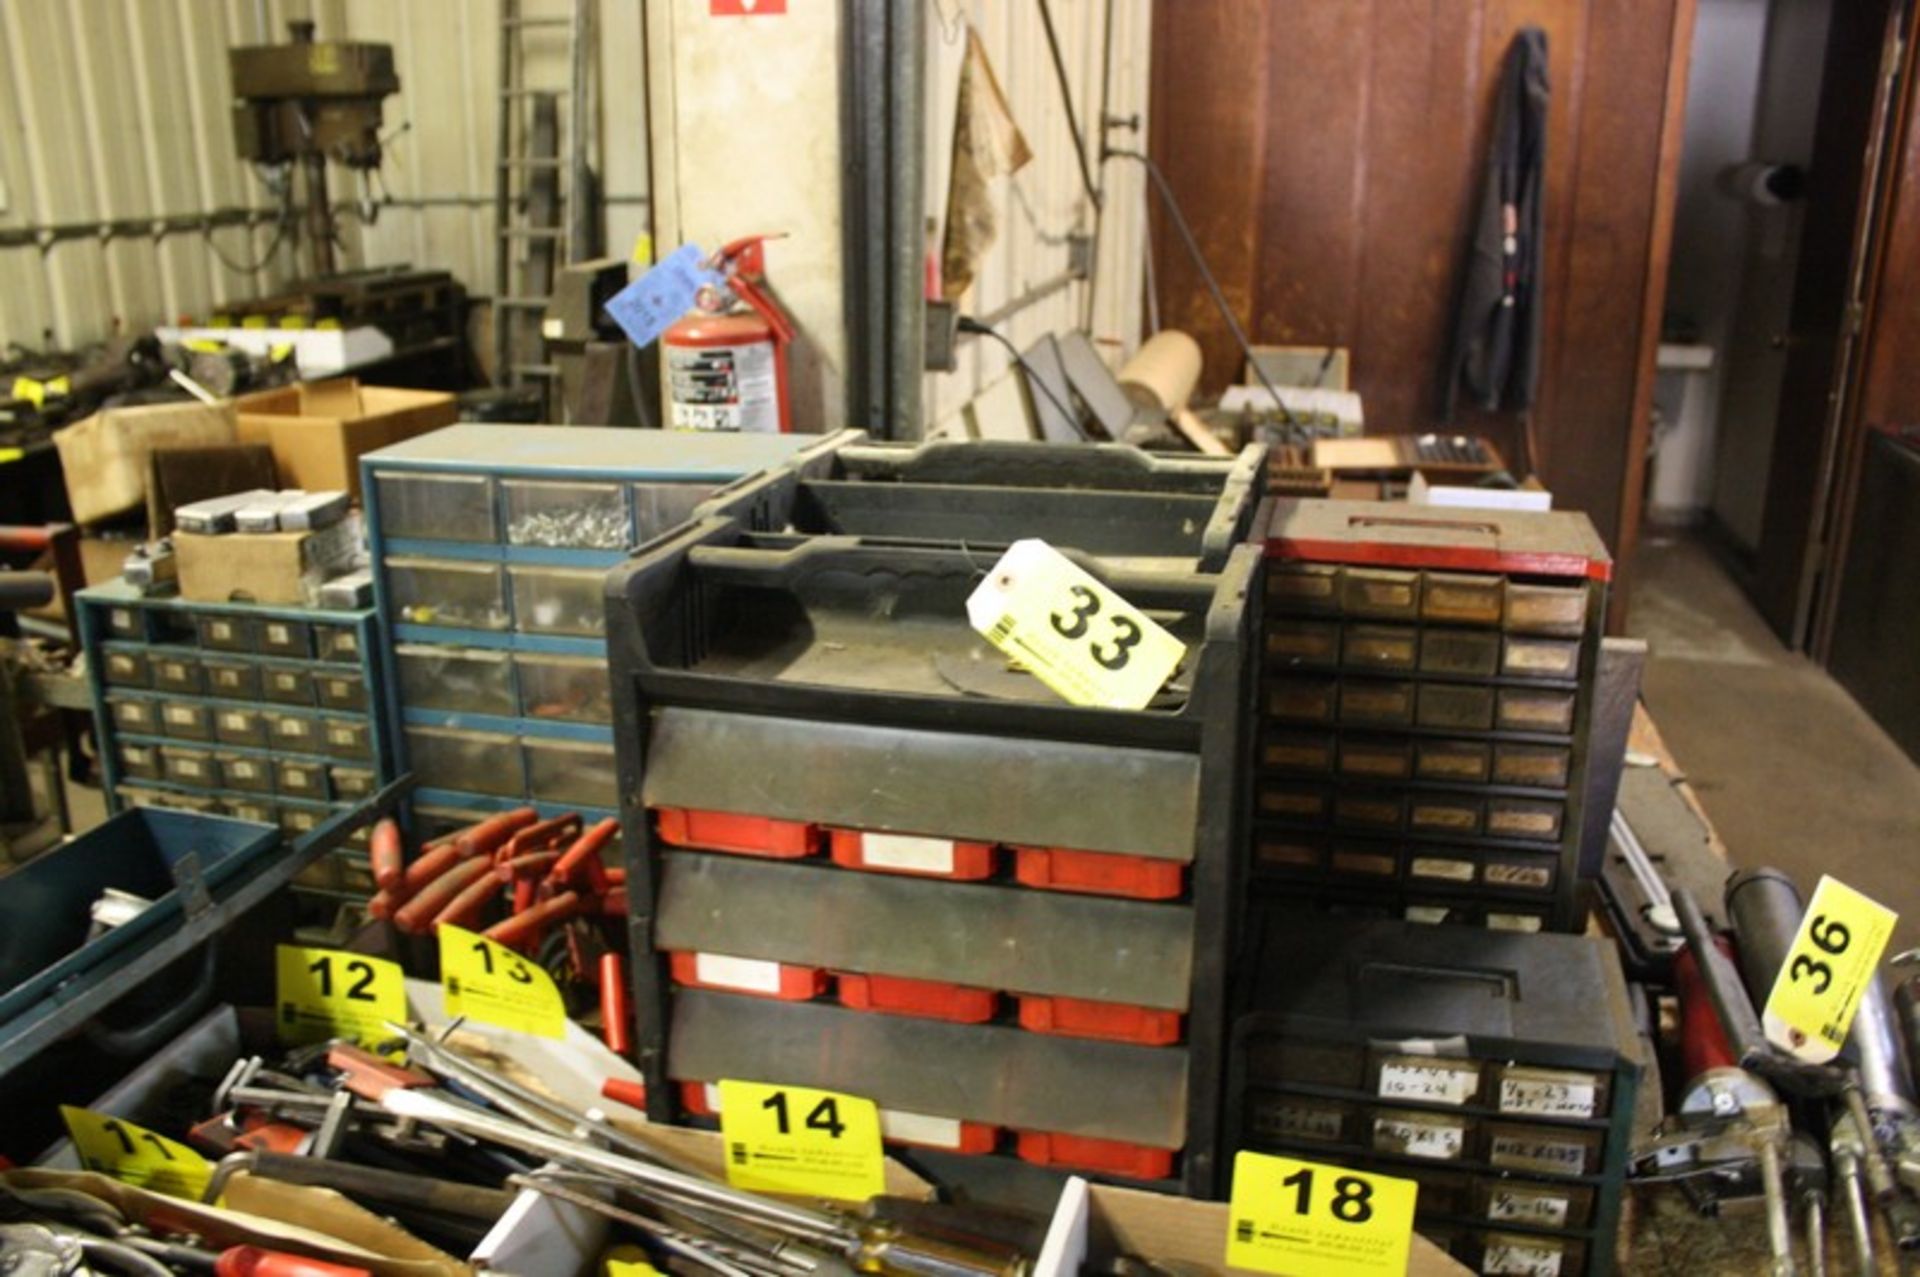 ASSORTED SMALL PARTS BINS CABINETS AND CONTENTS